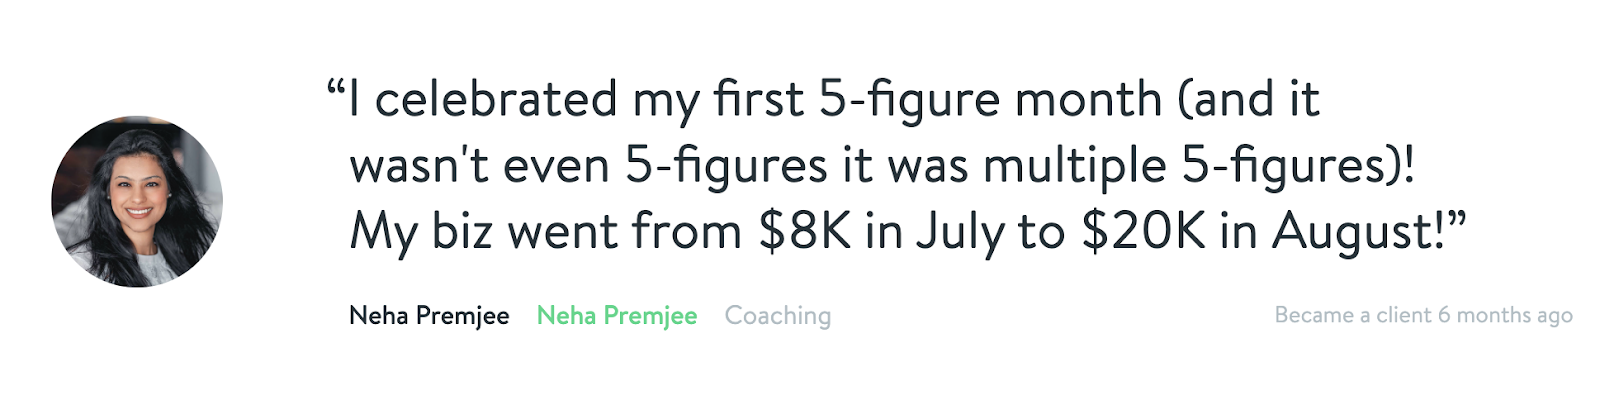 "I celebrated my first 5-figure month (and it wasn't even 5-figures it was multiple 5-figures)! My biz went from $8K in July to $20K in August!" - Neha Premjee